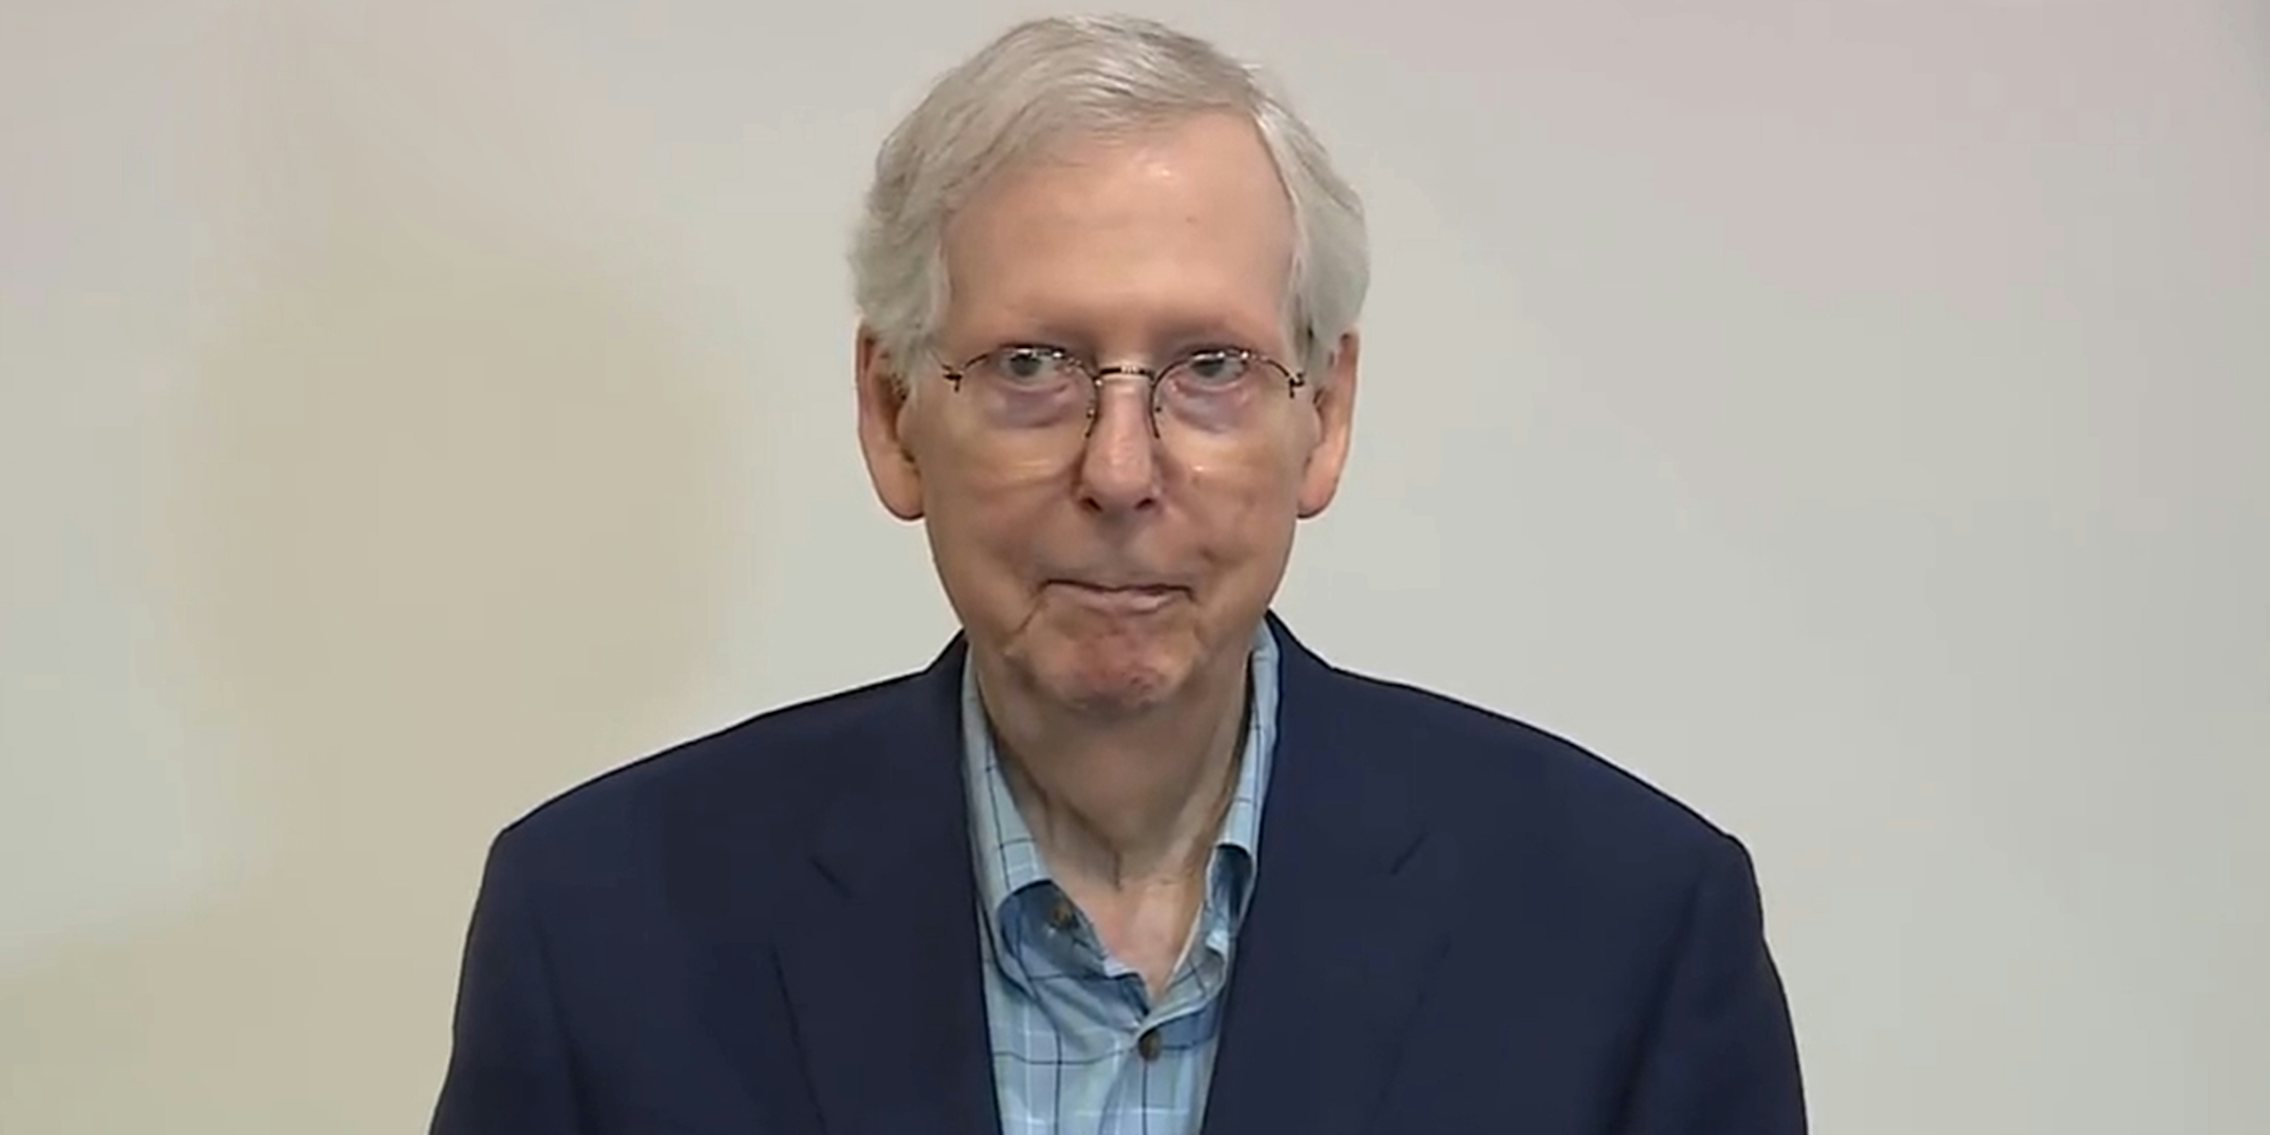 mitch mcconnell video